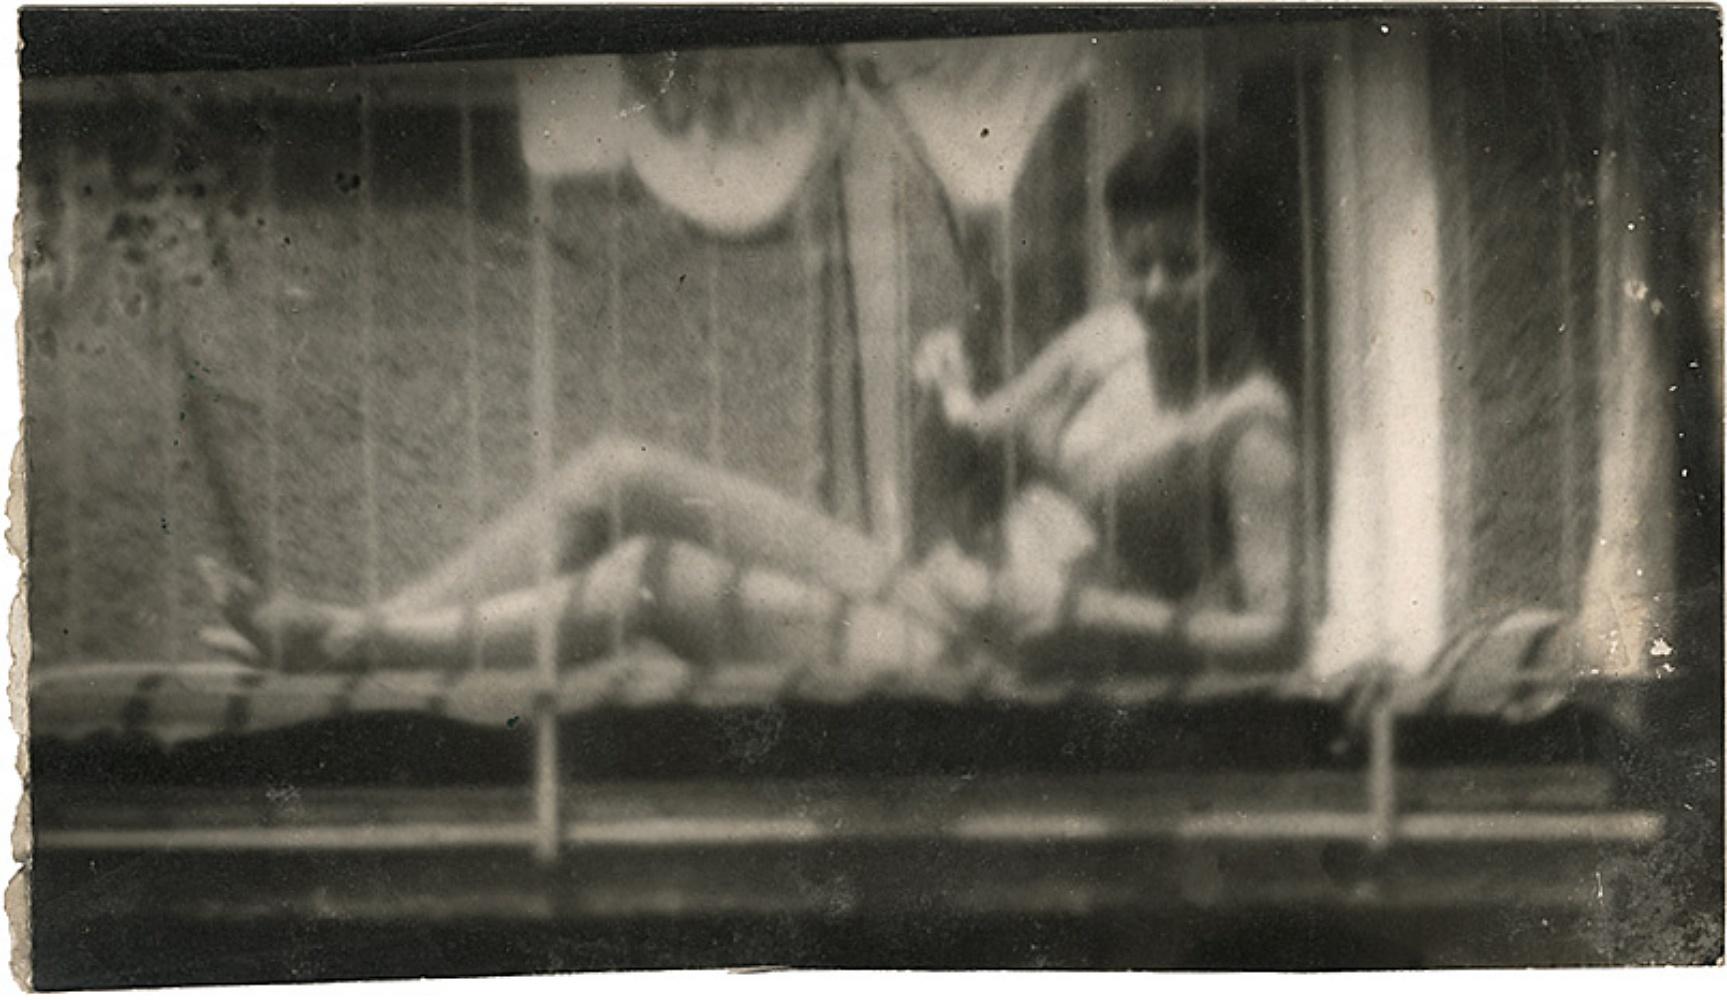 Miroslav Tichý (*1926, Czech Republic) 
Untitled, MT Inv. No 3-8-437 
Unknown, ca. 1970-1990
Silver Gelatin Print 
Sheet 11,8 x 20,4 cm (4 5/8 x 8 in.)
Unique
Print only

Tichý, practically reinventing photography from scratch, reconstitutes